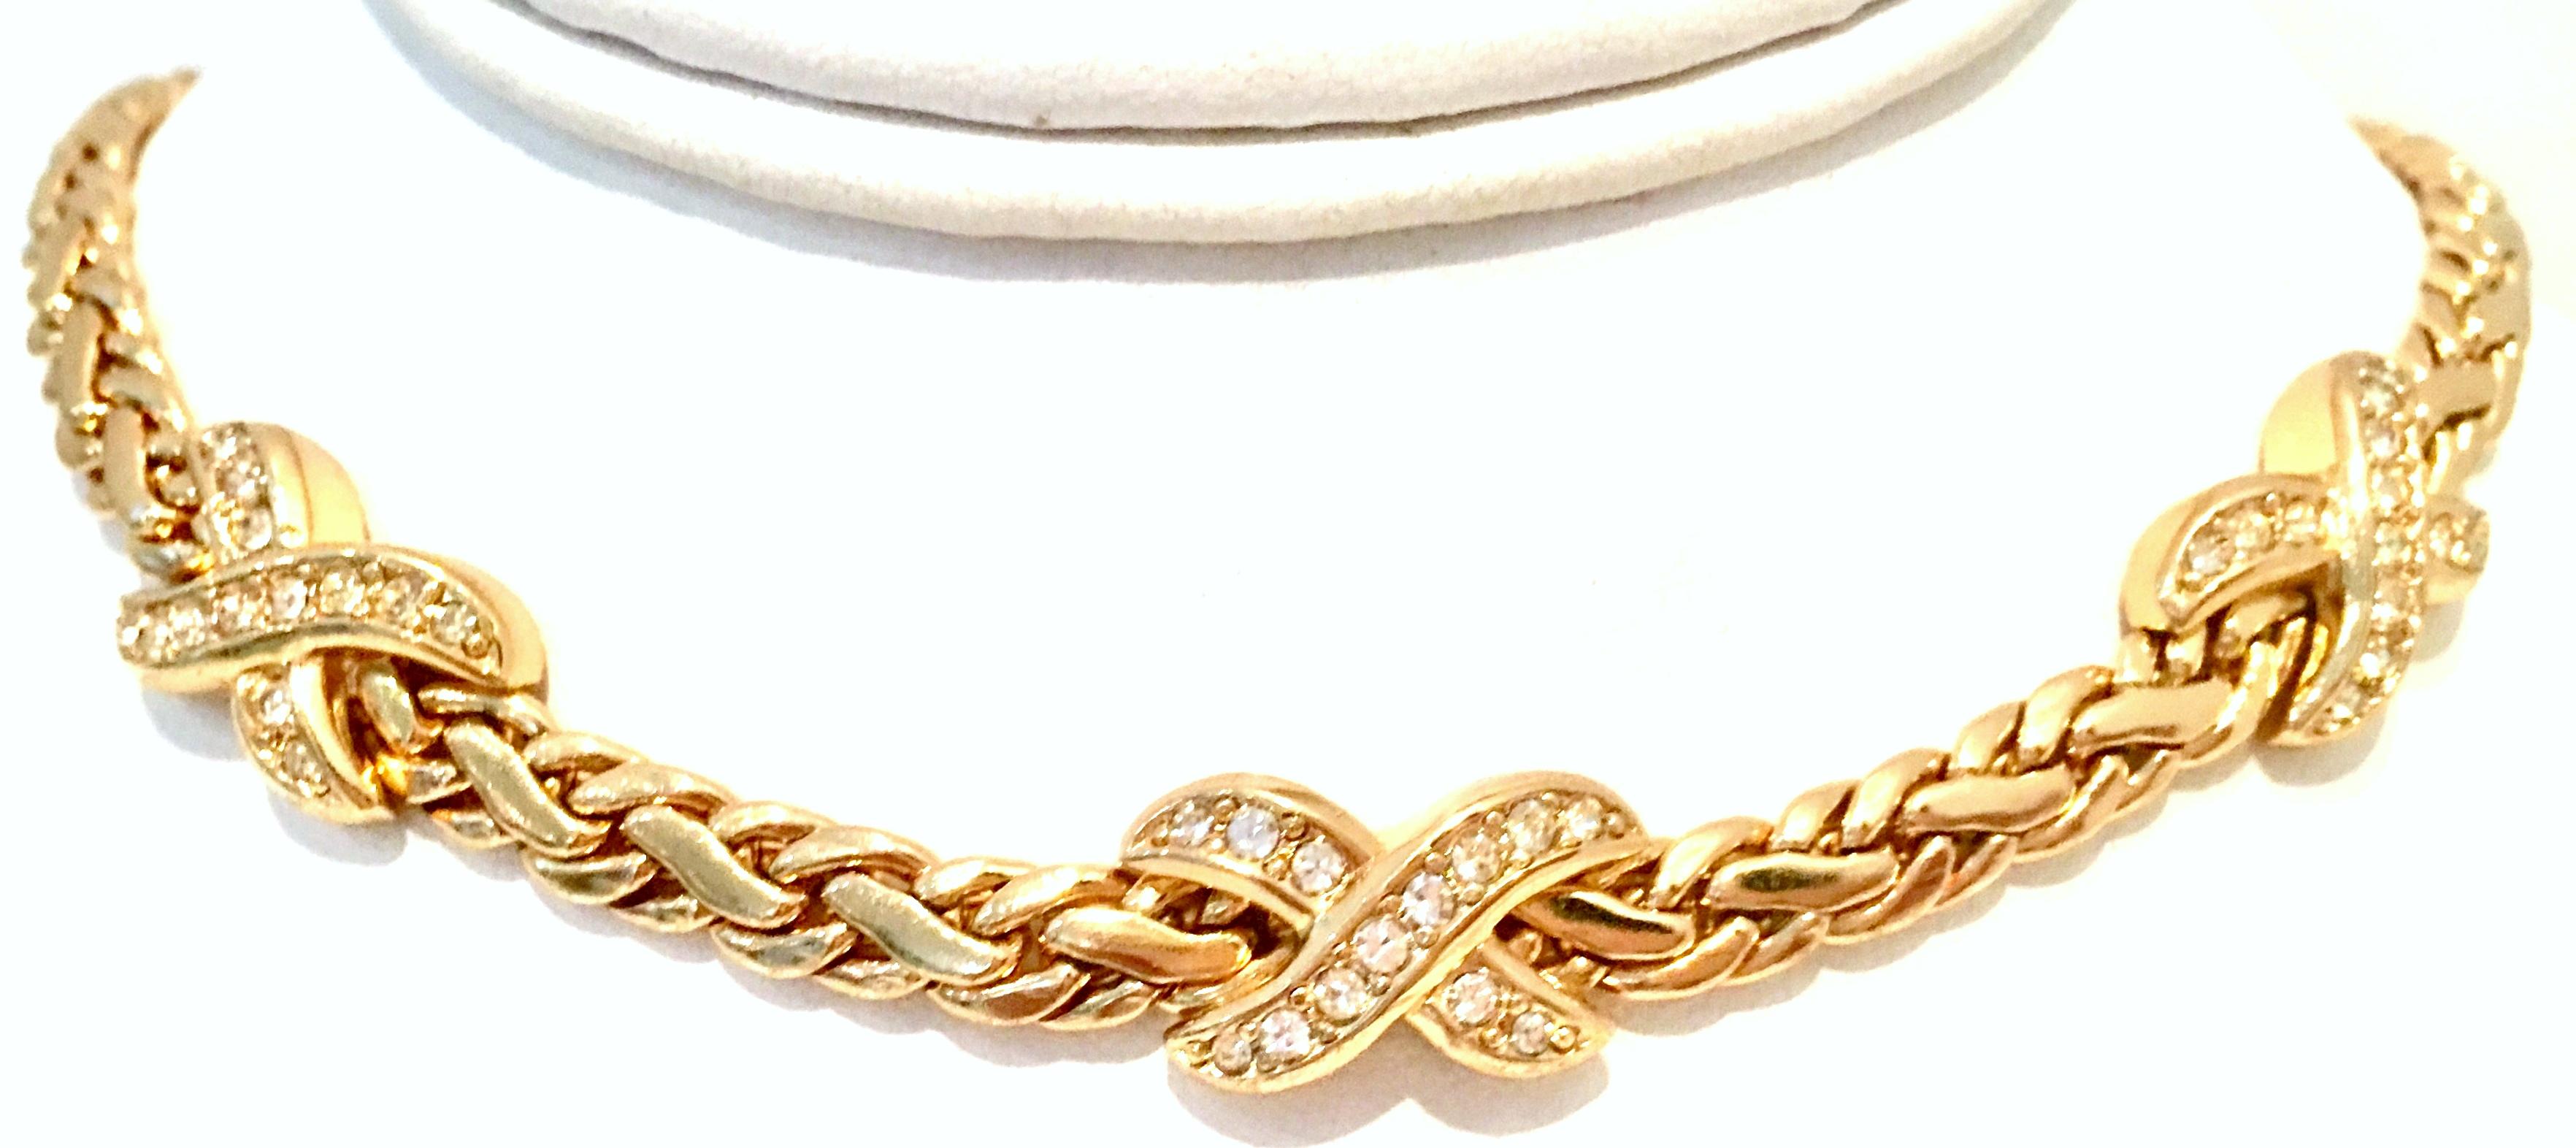 20th Century Gold & Swaorovski Crystal Choker Style Necklace By, Christian Dior. This gold plate twisted rope style choker necklace features three dimensional twist 